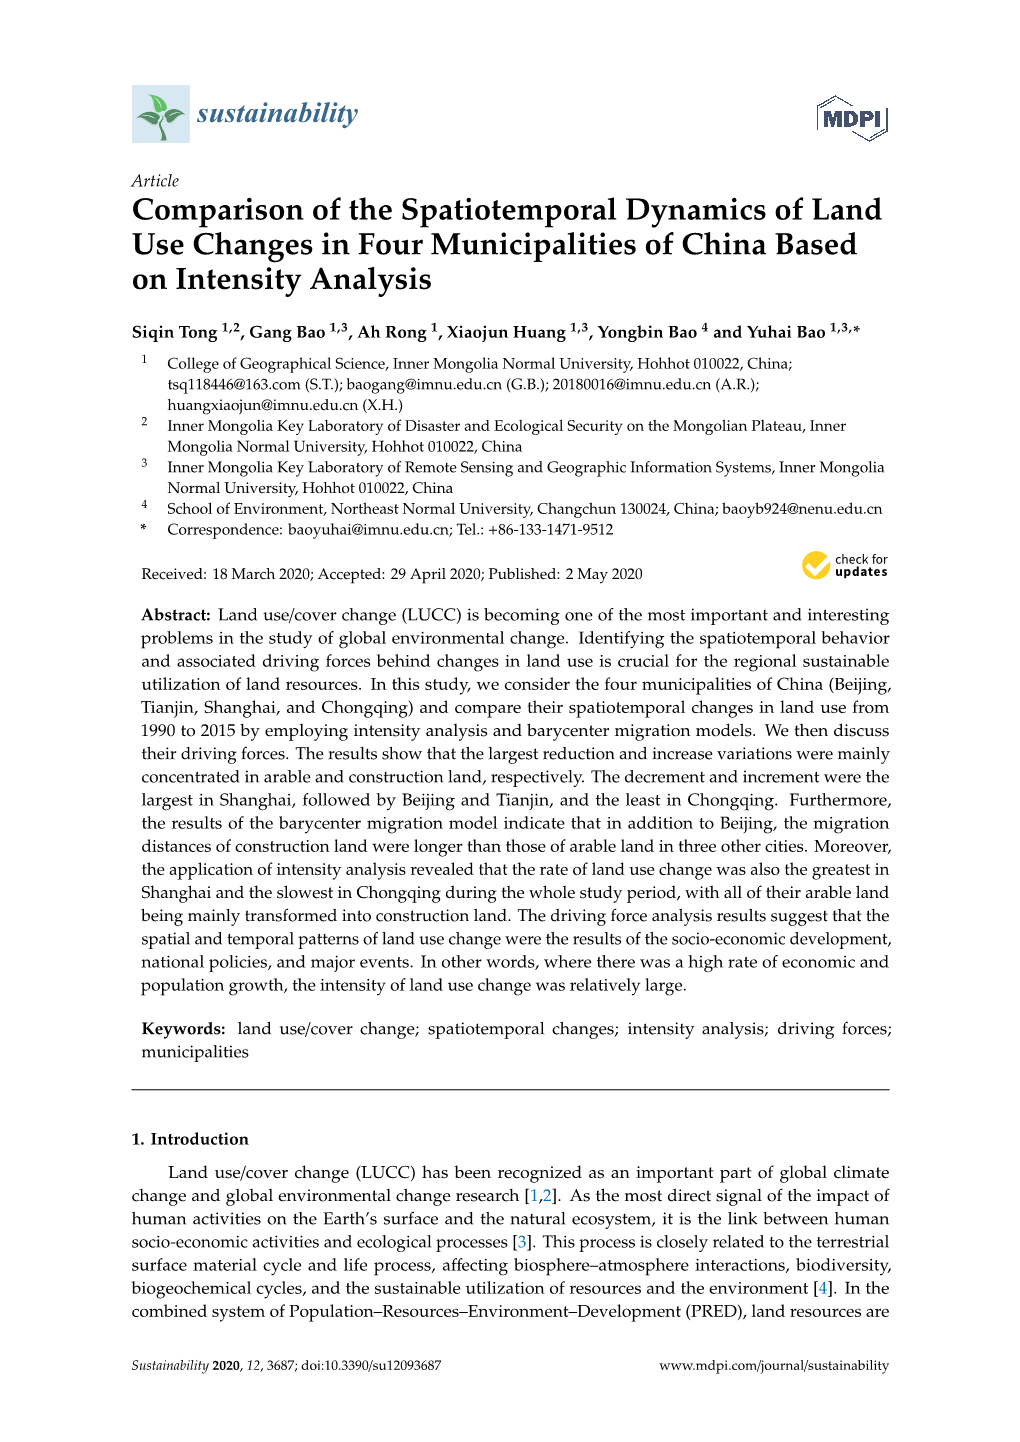 Comparison of the Spatiotemporal Dynamics of Land Use Changes in Four Municipalities of China Based on Intensity Analysis